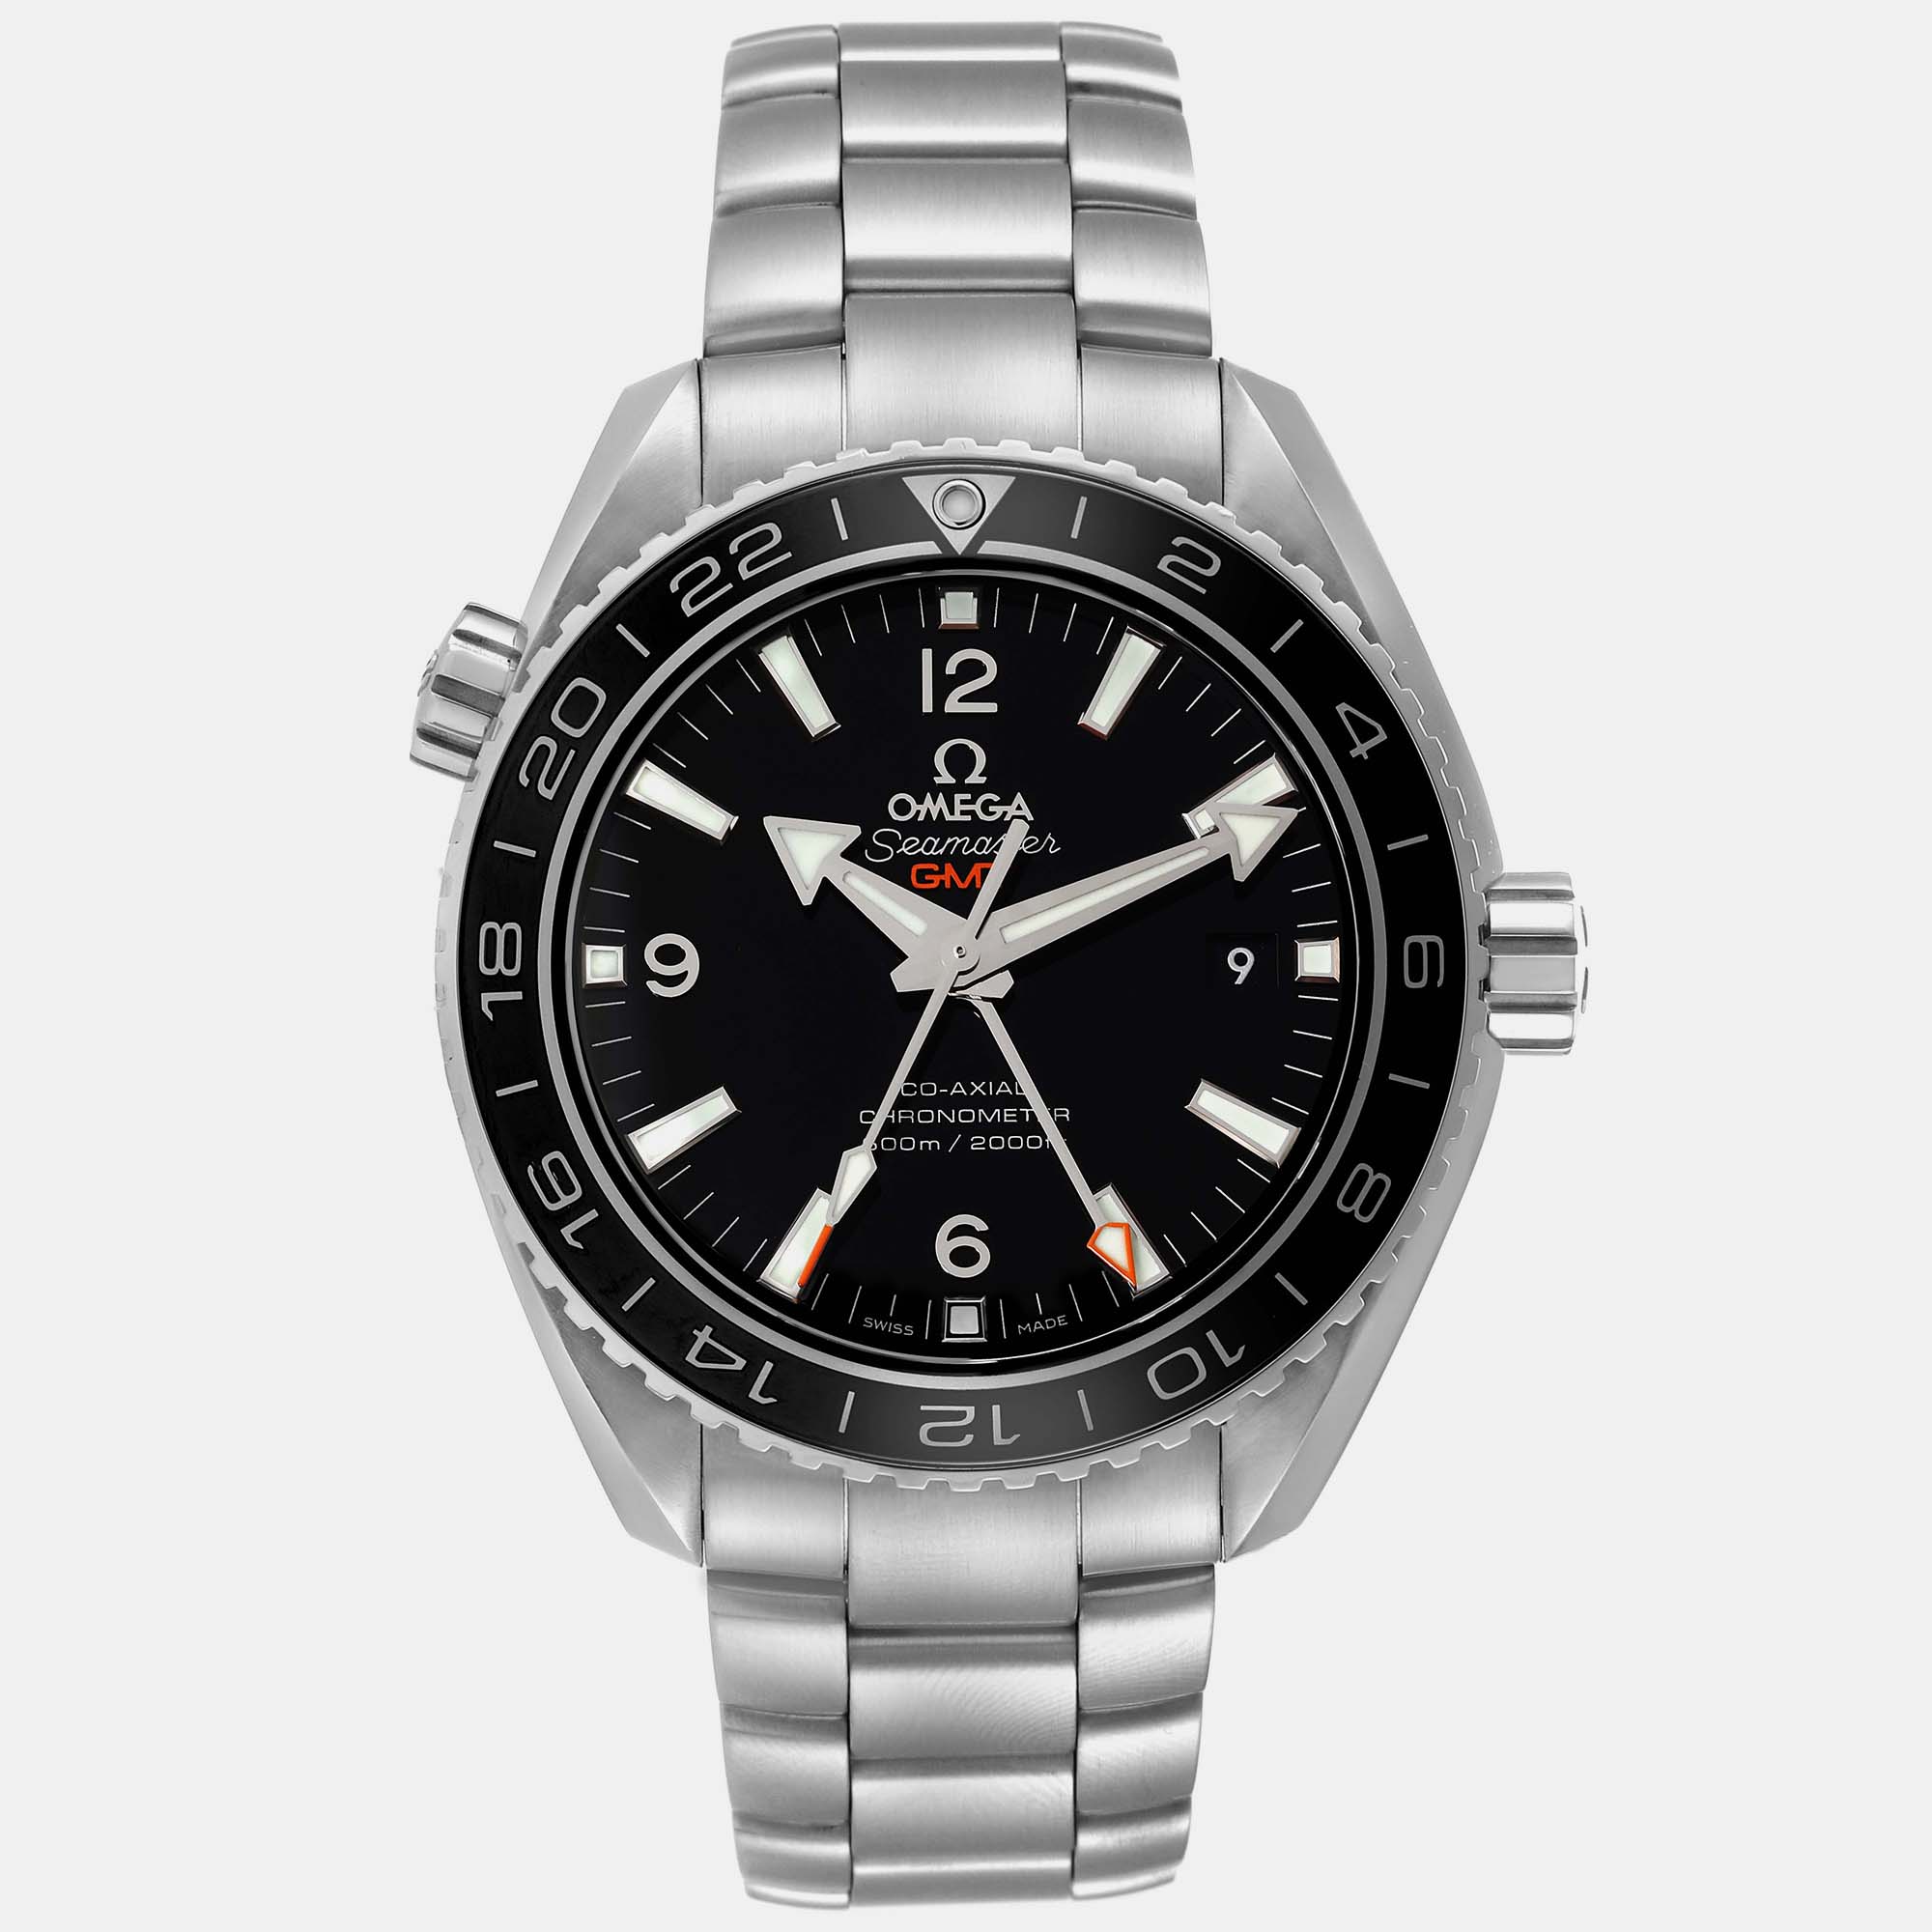 Omega black stainless steel seamaster planet ocean 232.30.44.22.01.001 automatic men's wristwatch 43.5 mm